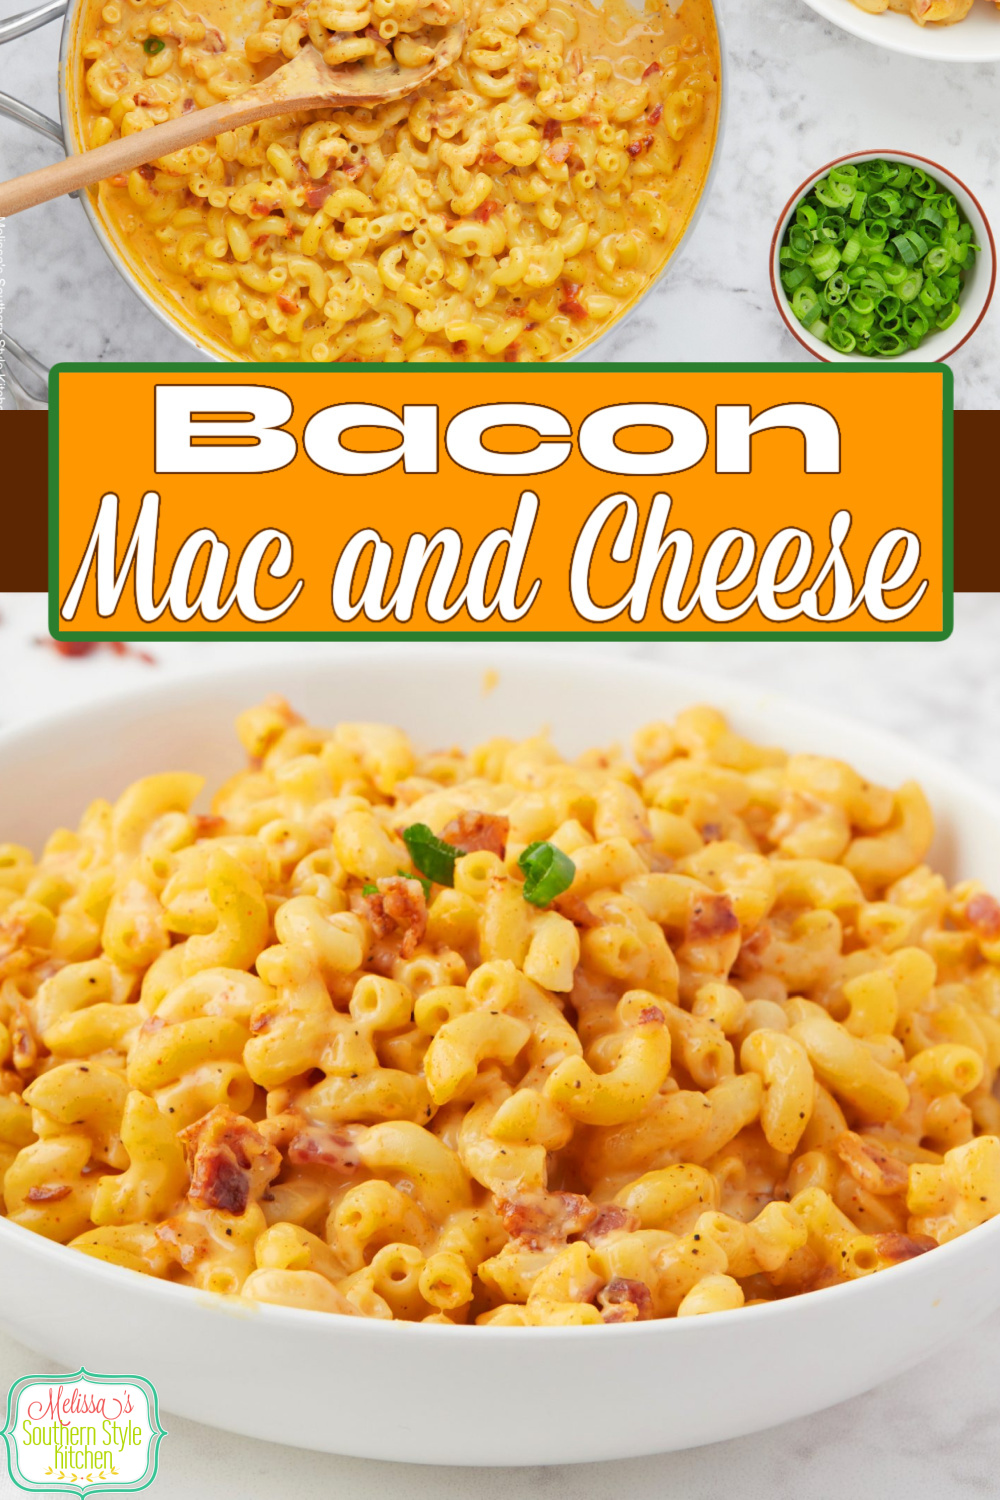 This Easy Bacon Mac and Cheese recipe can be served as a delicious main dish or a side dish for busy day meals with the family. #macaroniandcheese #baconmac #baconmacandcheese #macaronirecipes #bacon #southernmacaroniandcheese #stovetopmacandcheese via @melissasssk